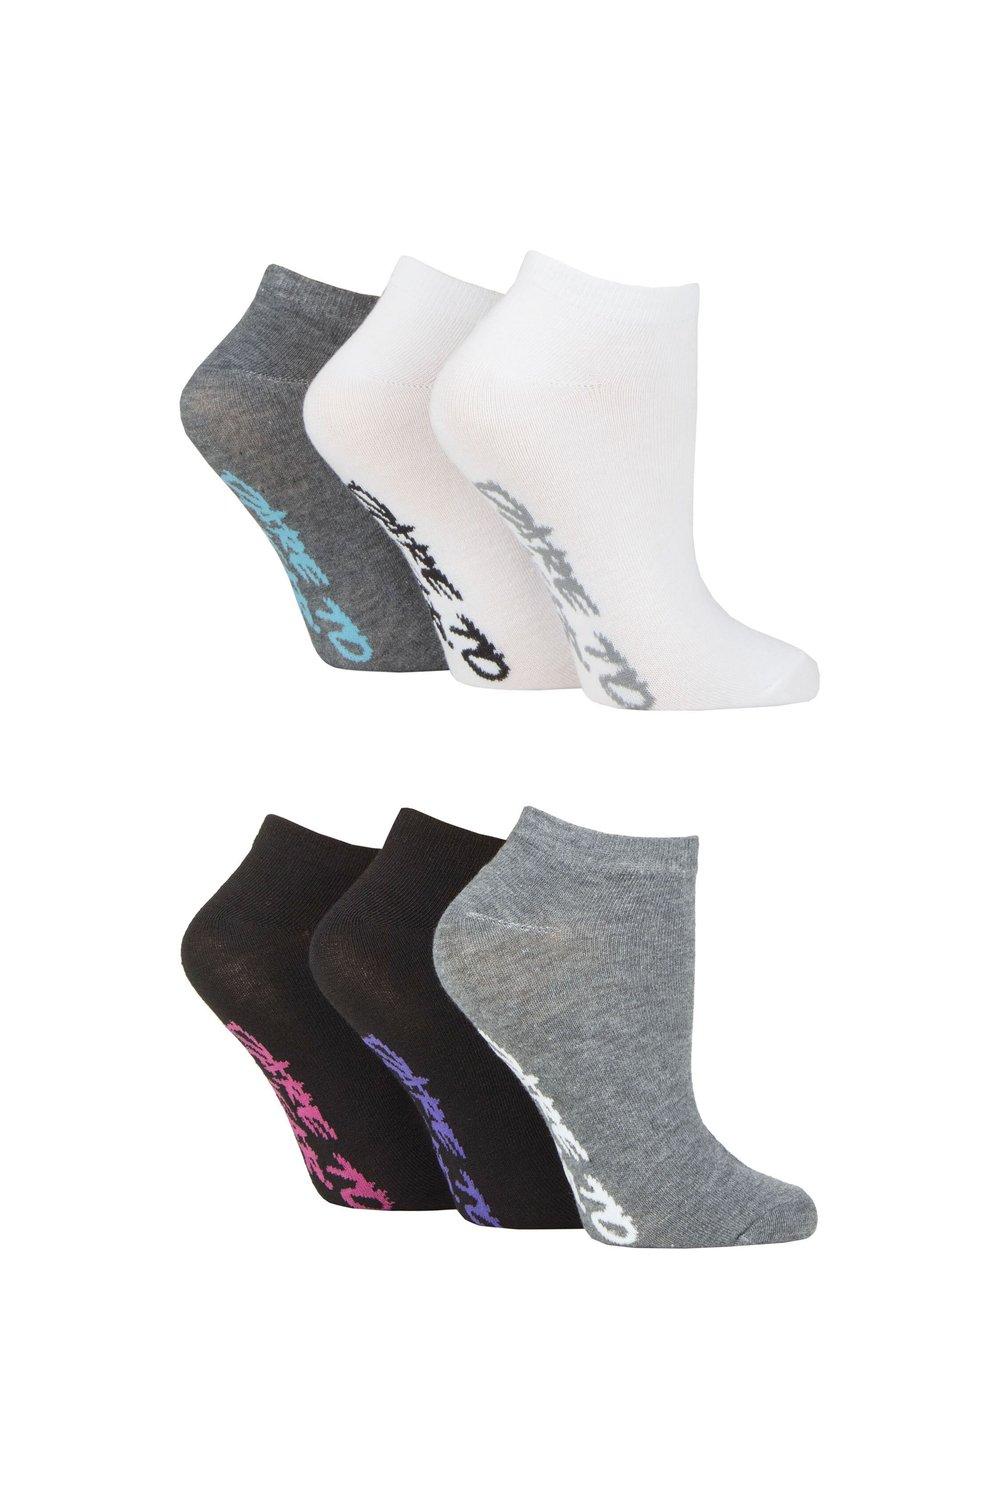 6 Pair Dare to Wear Patterned and Plain Trainer Socks